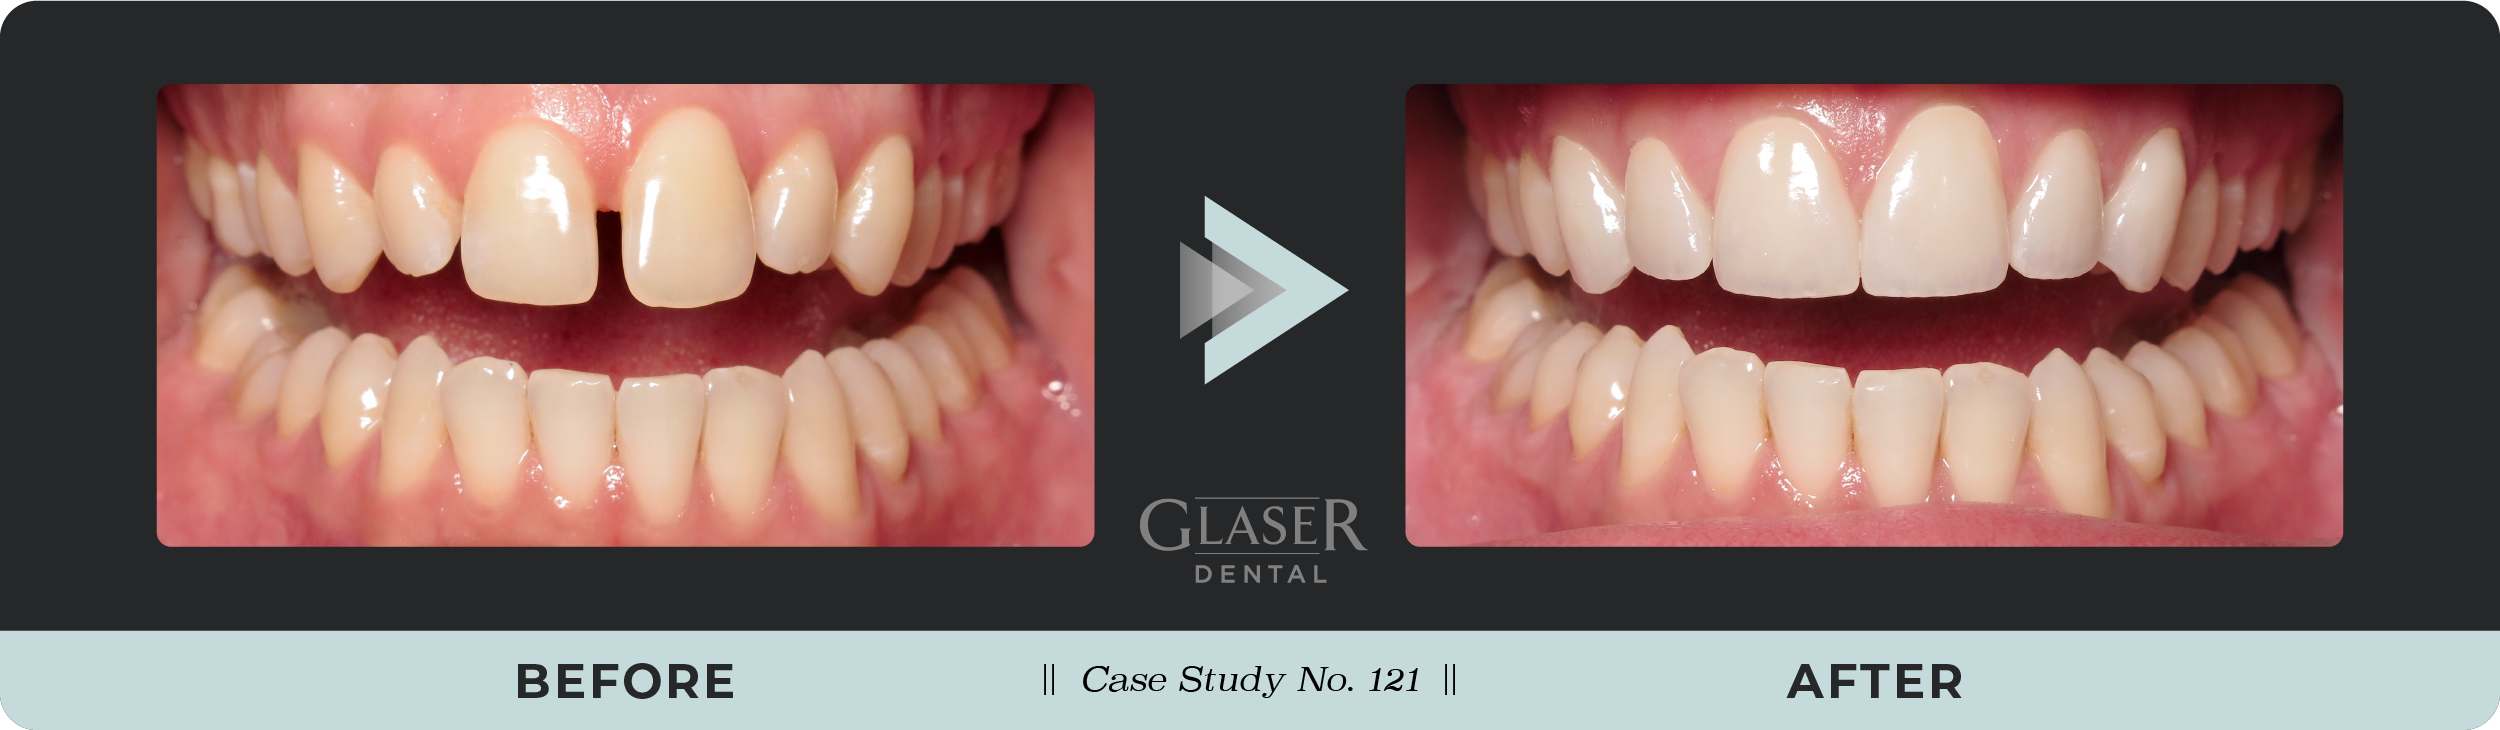 Before & After Photo Comparing Dental Problem and Results of Solution